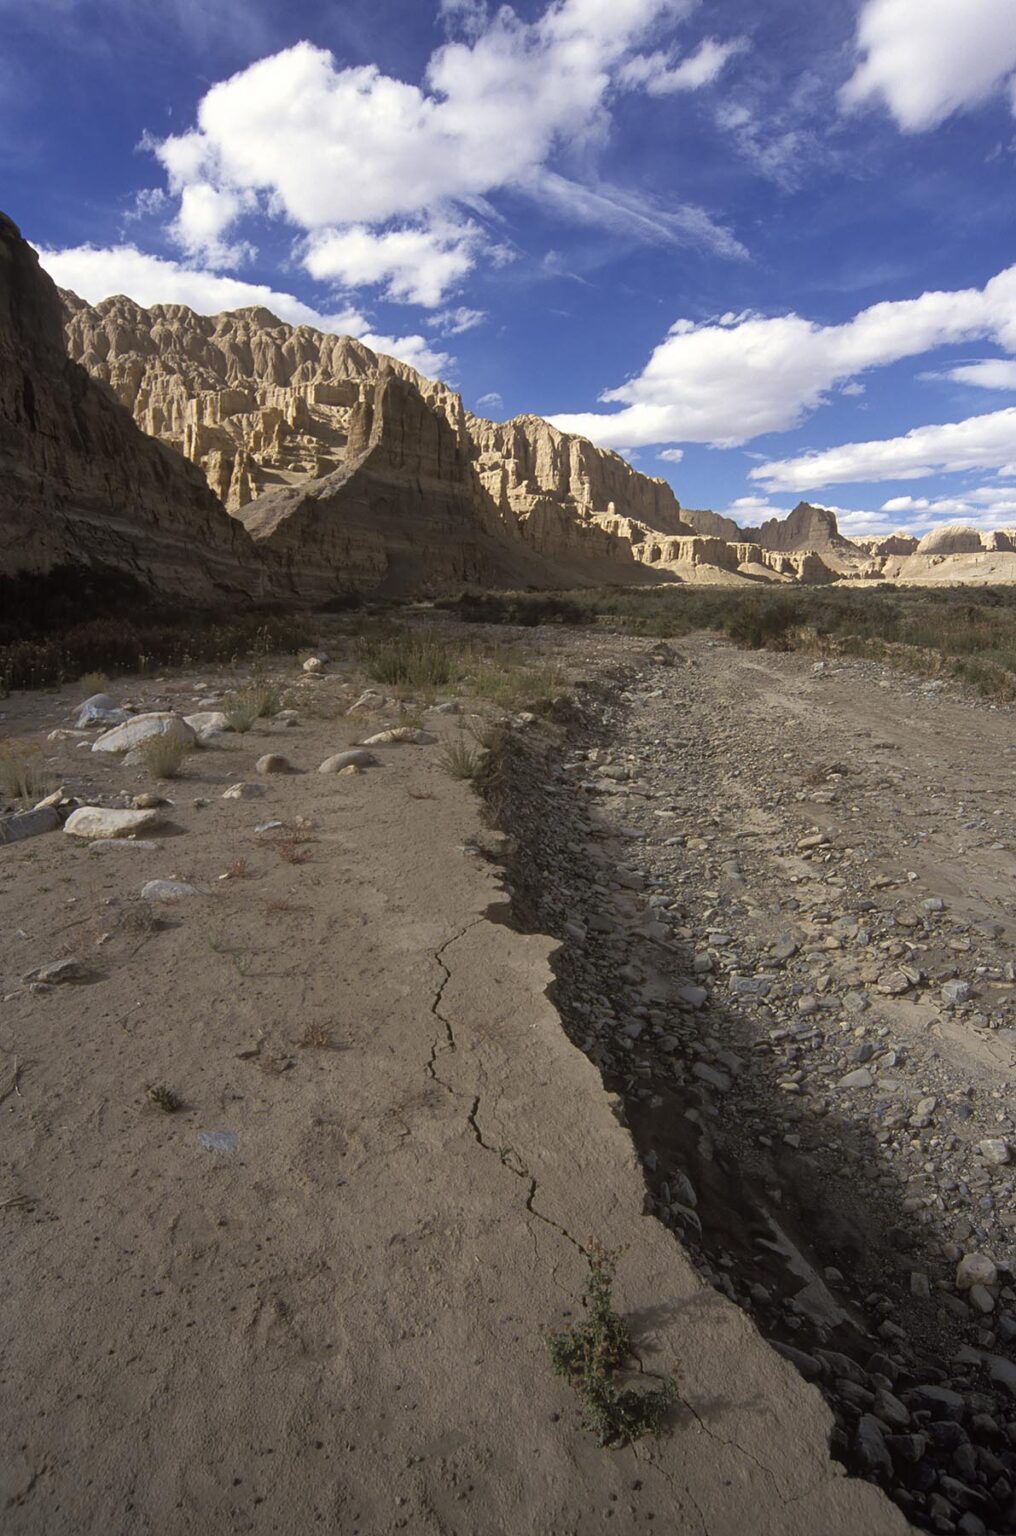 ERODED ROCK FORMATIONS and RIVER BED in the HIMALAYAN GORGE north of the GUGE KINGDOM & west of MT. KAILASH - TIBET